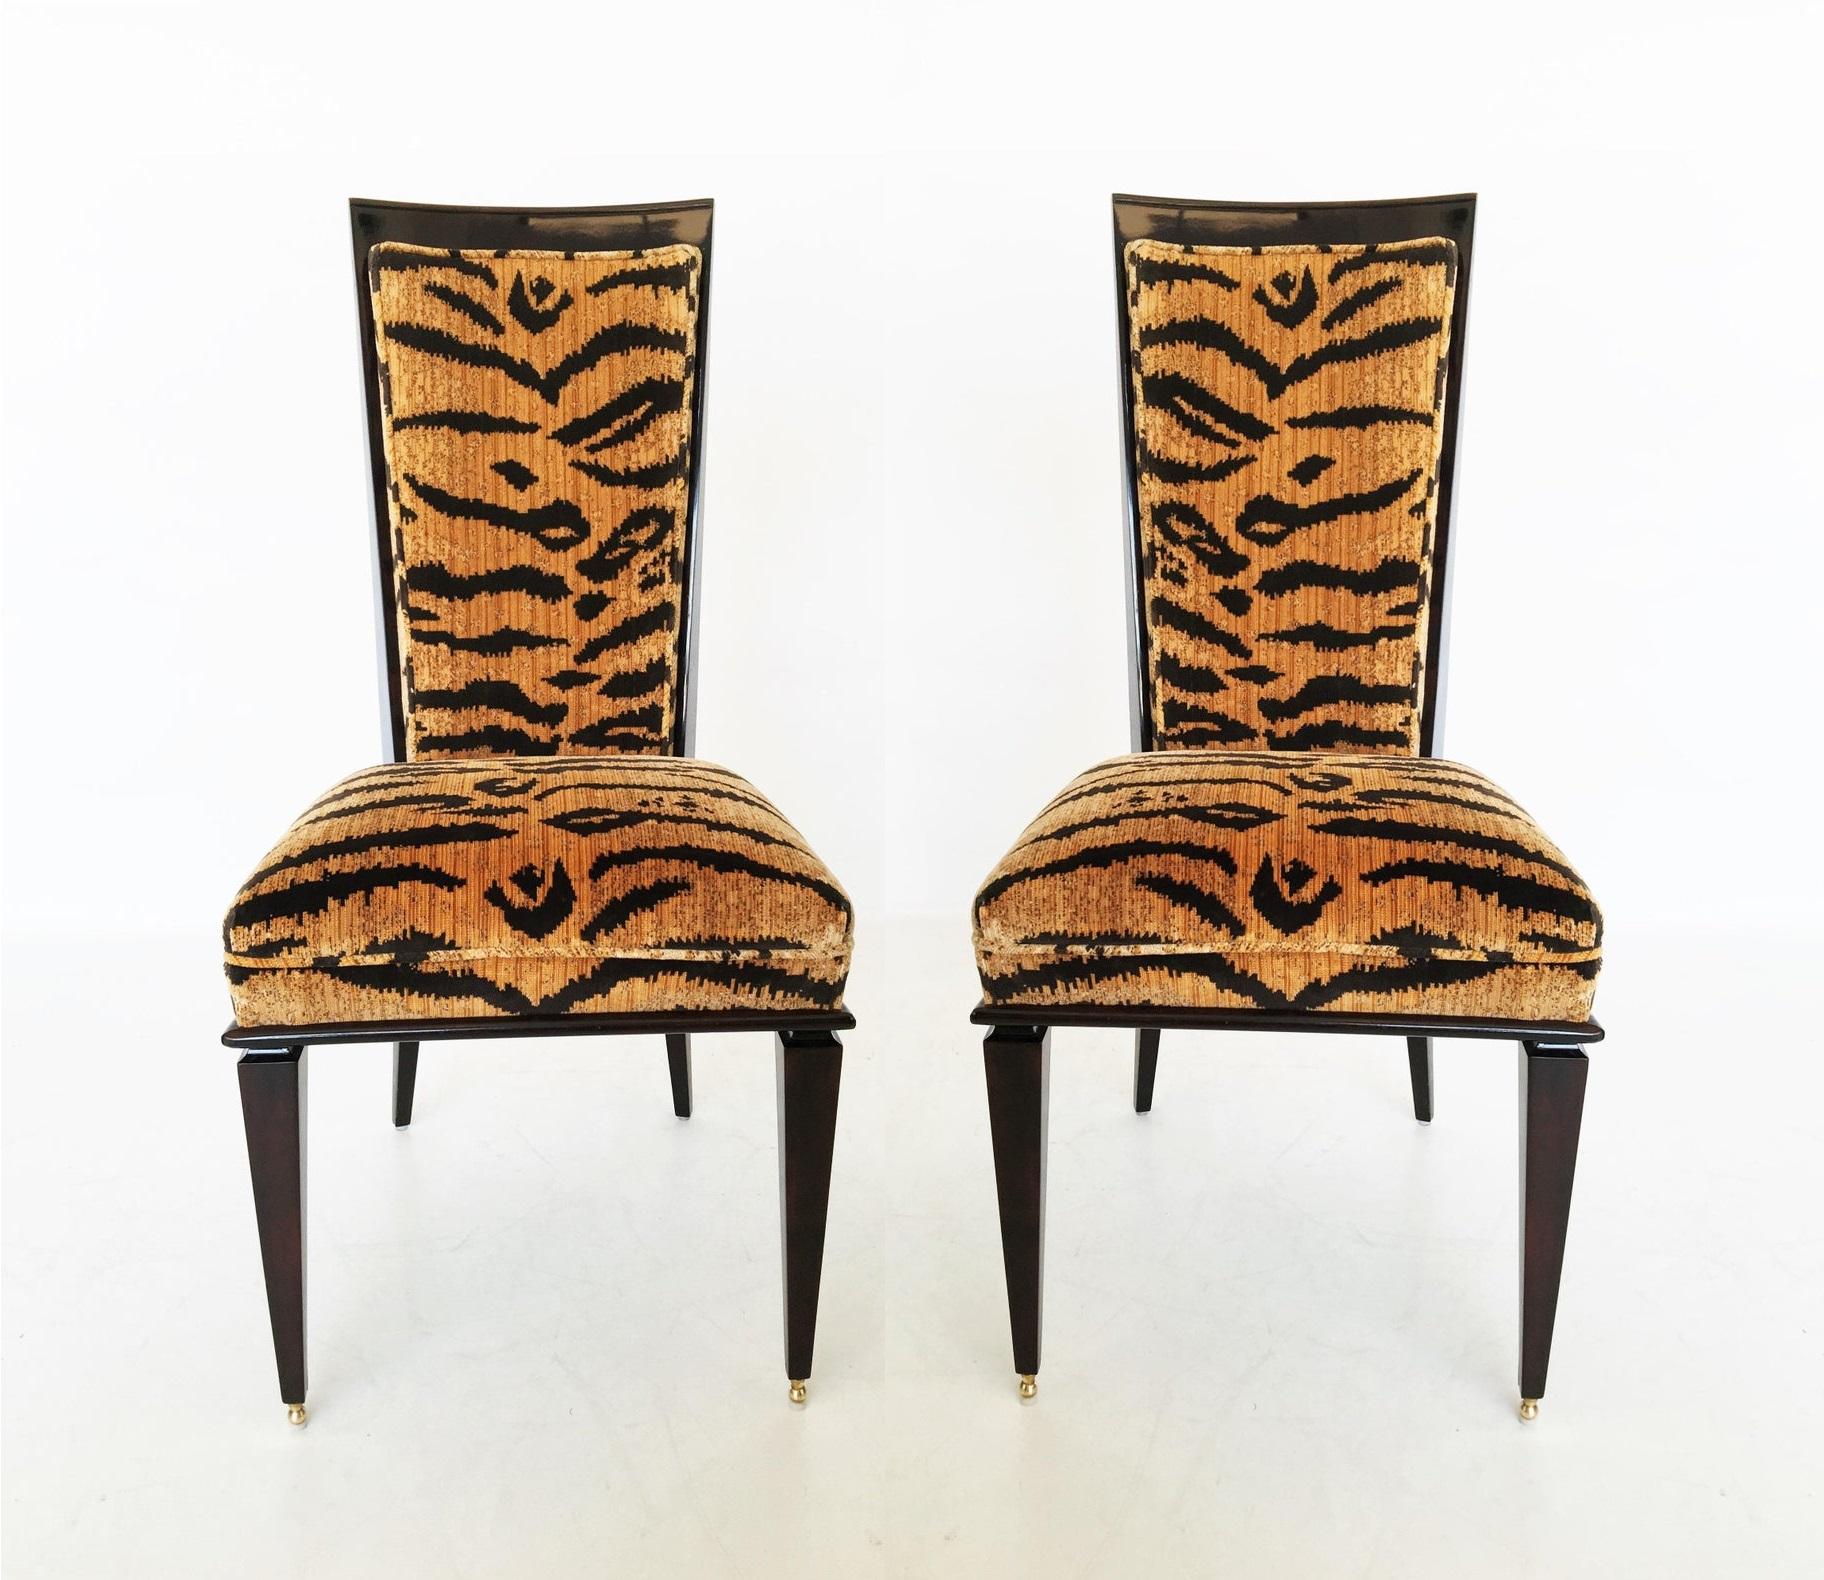 Leopard Print Dining Chairs, Leopard Print Parsons Chairs